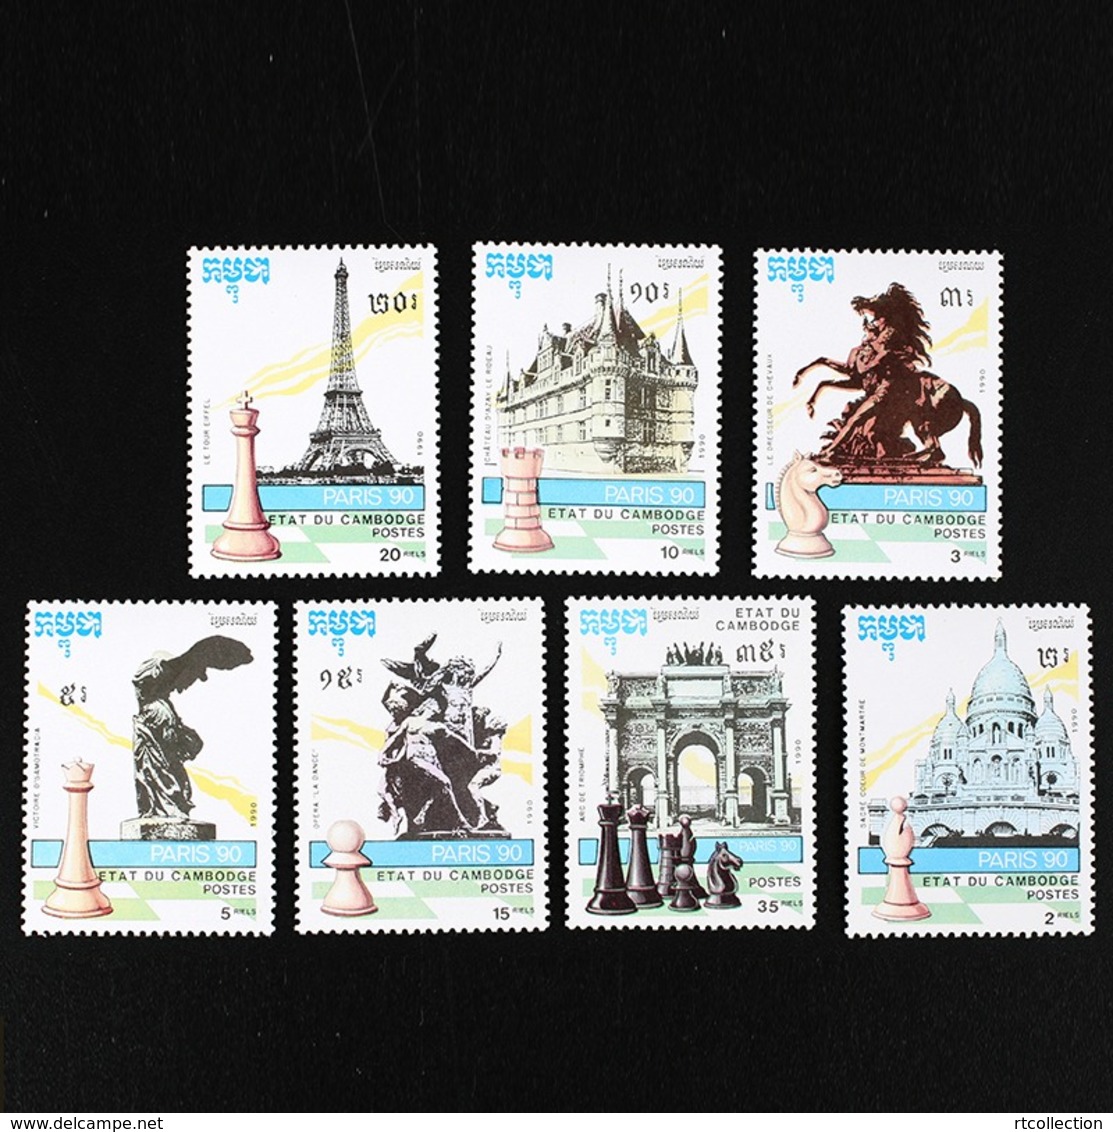 Cambodia 1990 World Chess Championship Paris Architecture Buildings Tour Eiffel Tower Game Stamps MNH Michel 1169-1176 - Cambodia